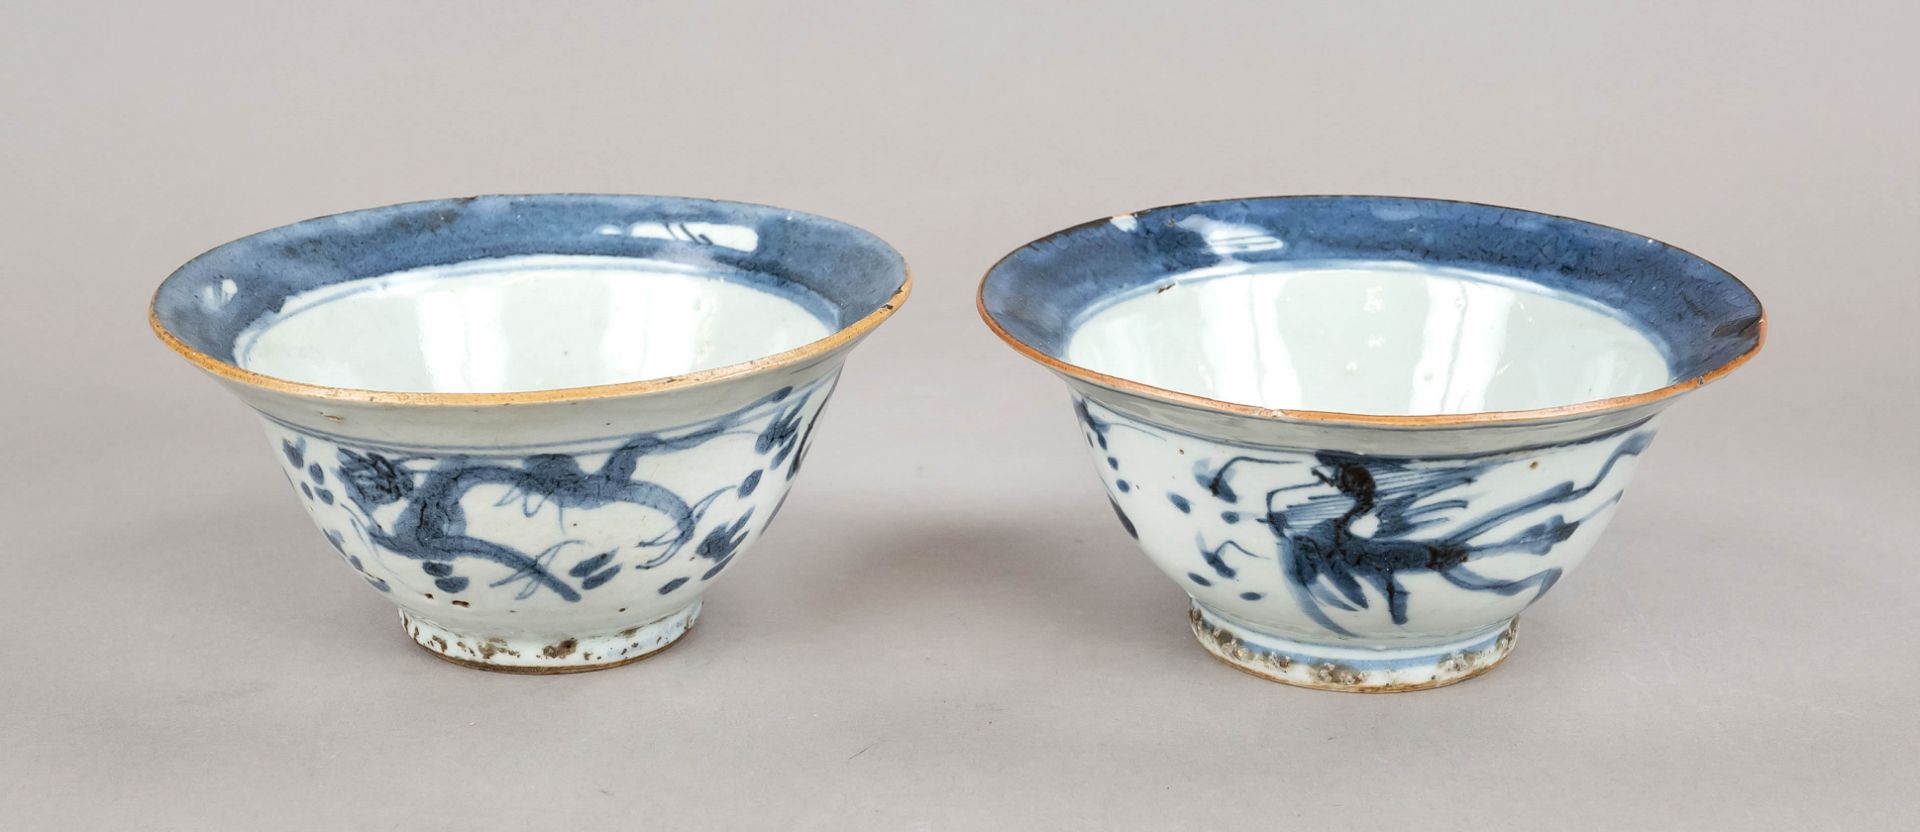 Pair of blue and white bowls, China, Qing dynasty(1644-1912), 18th-19th century, grayish porcelain